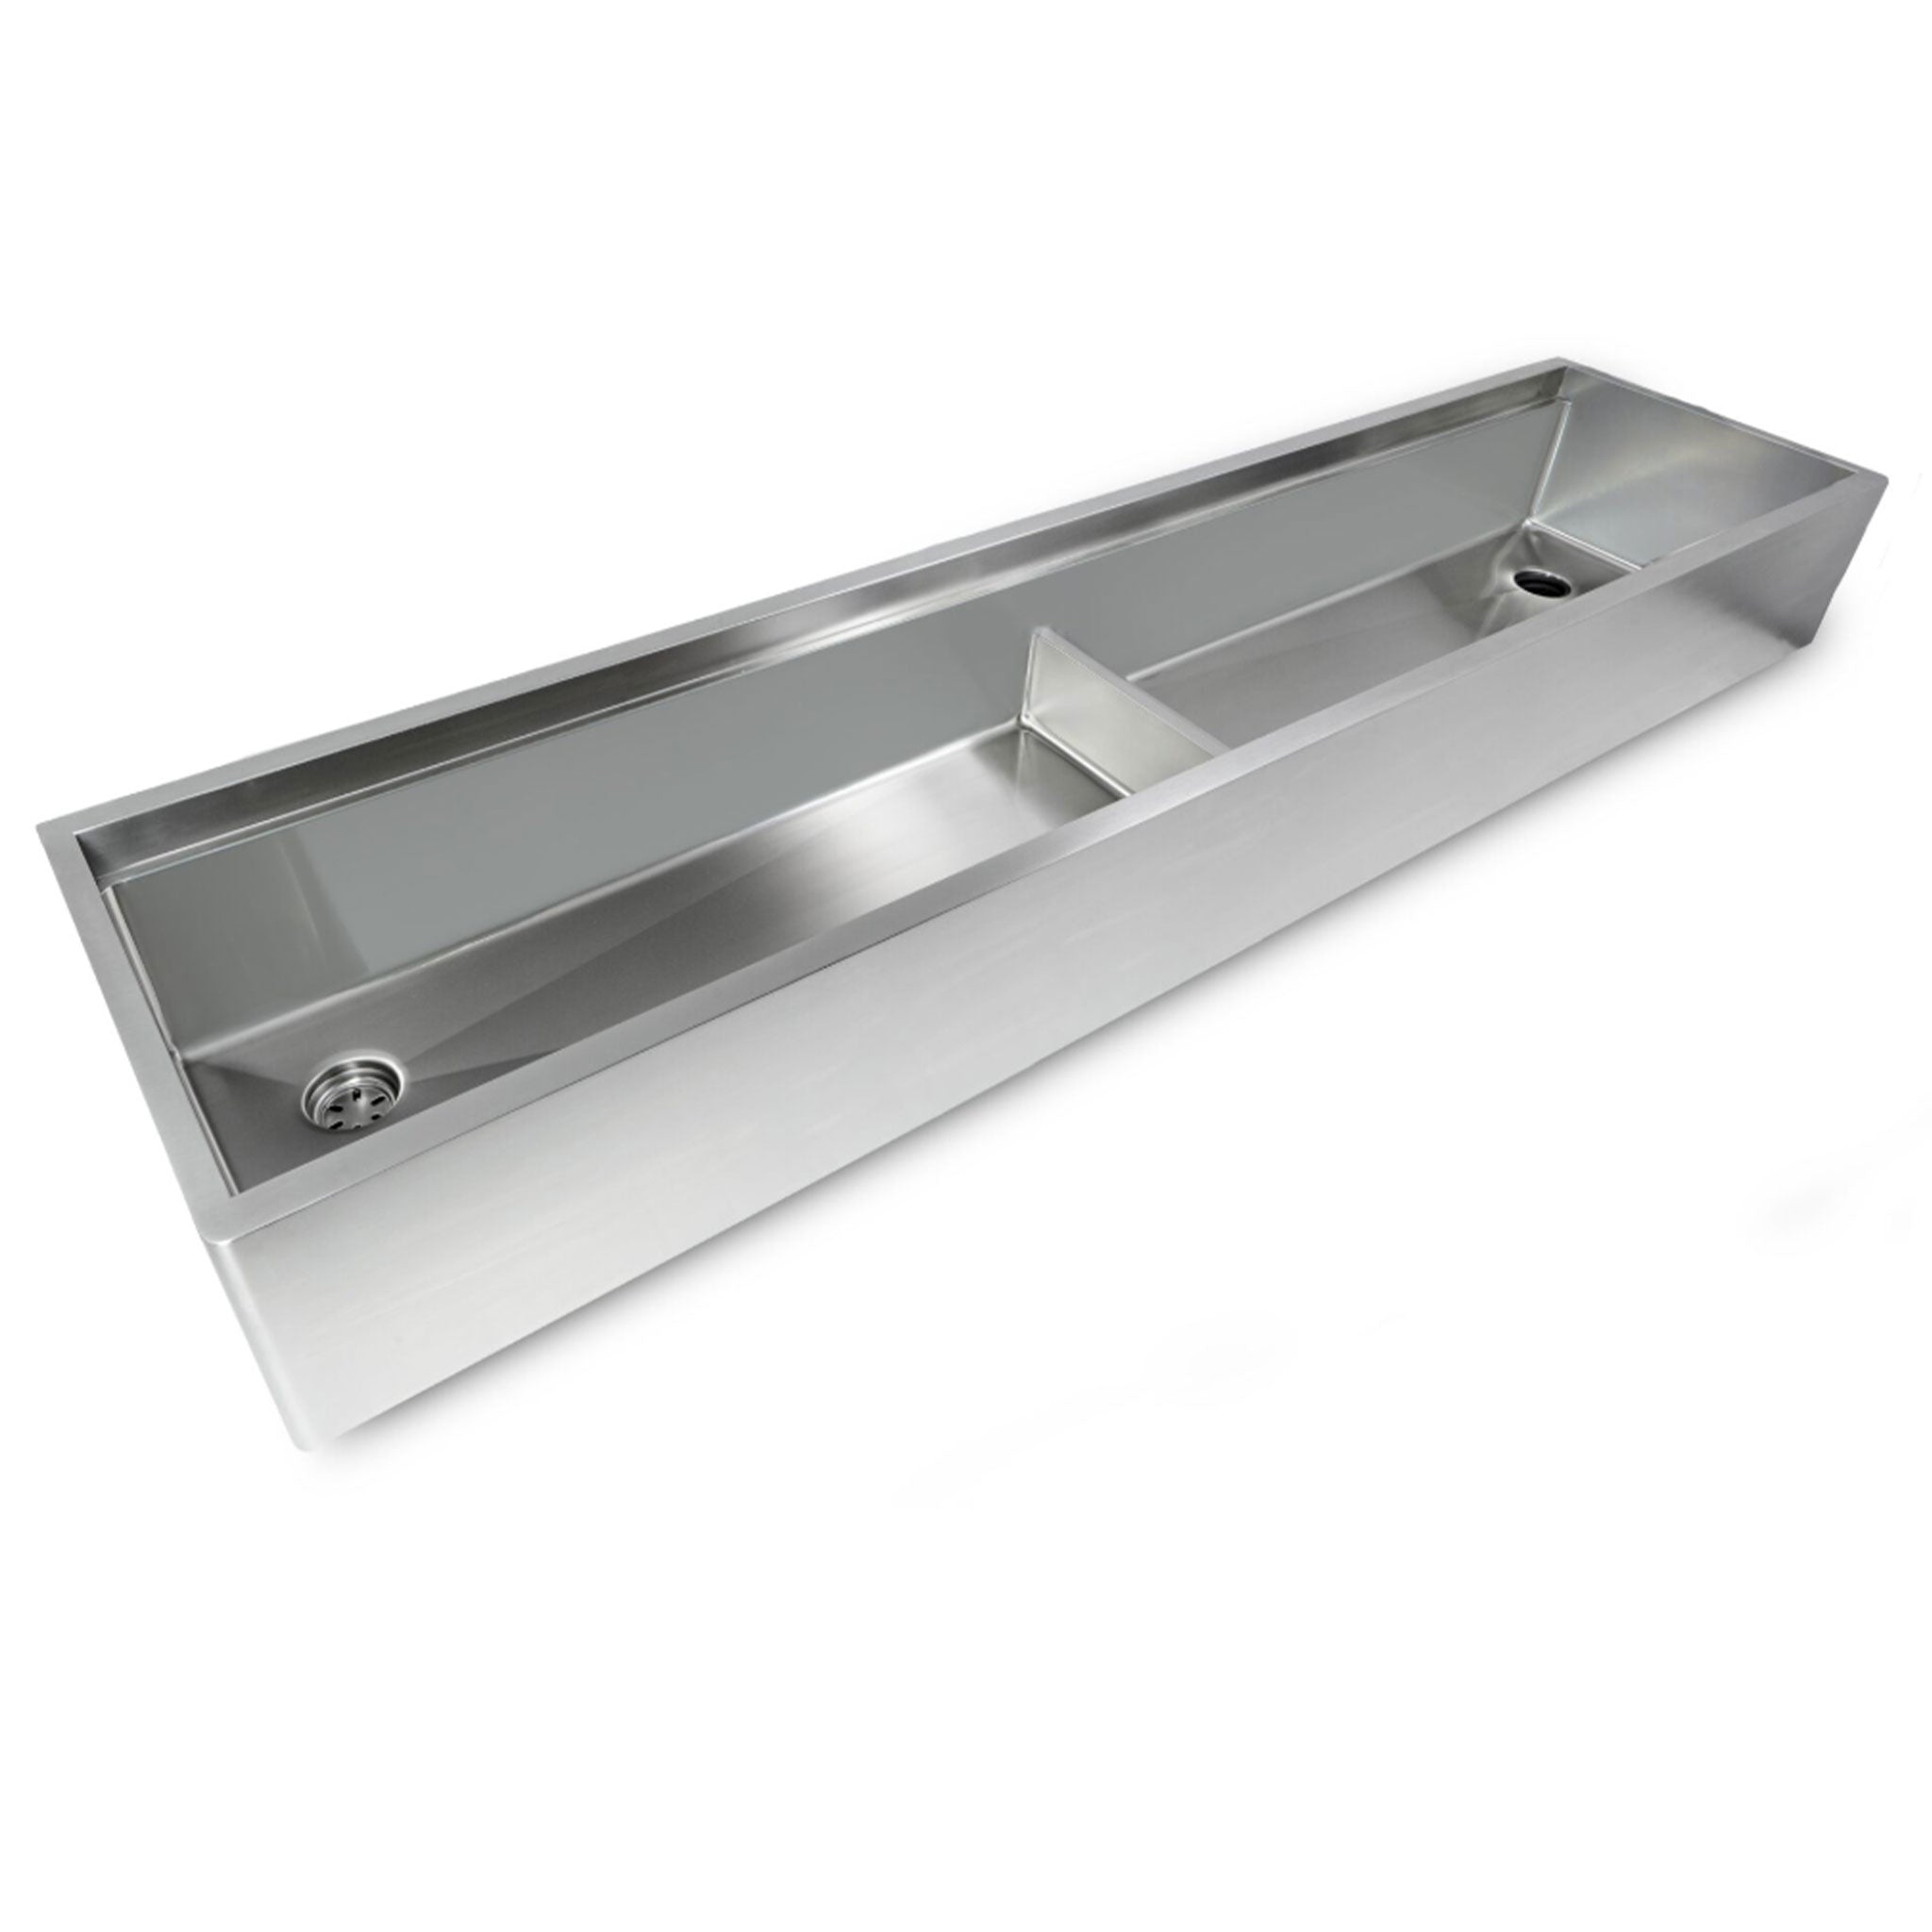 84 inch stainless steel undermount apron front double bowl workstation kitchen sink 